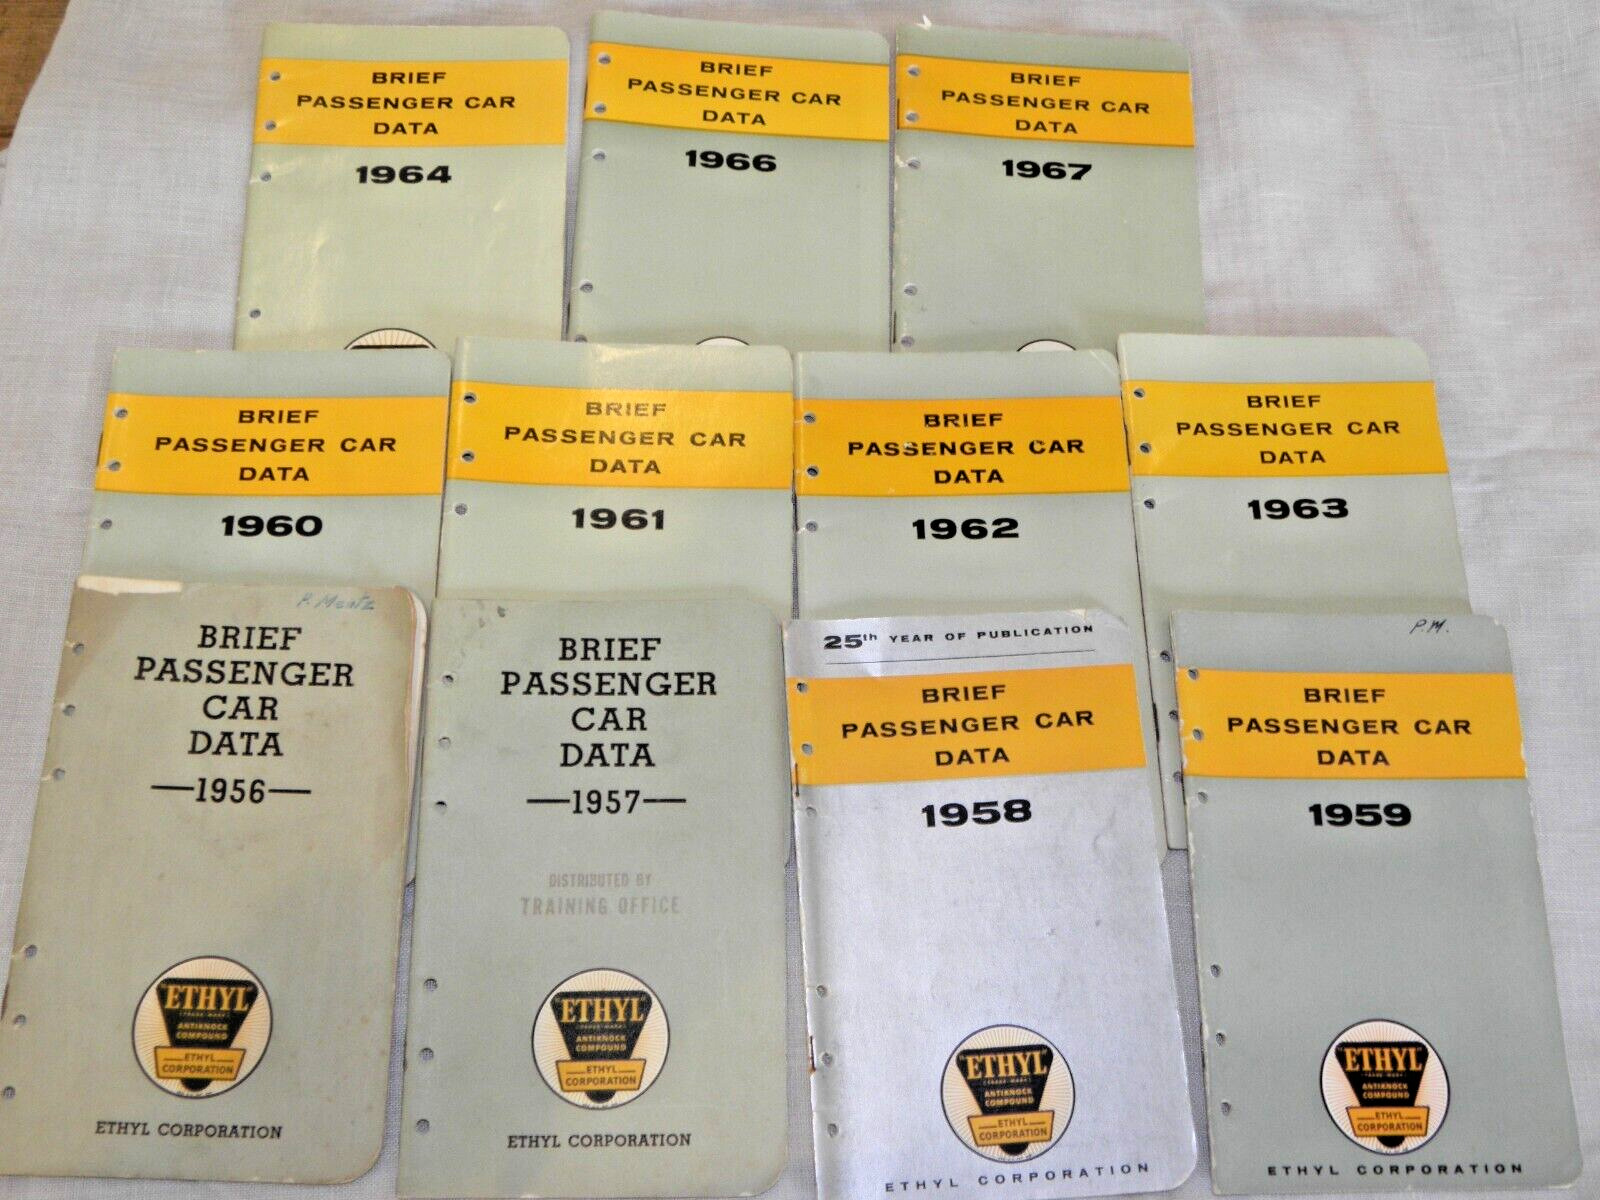 LOT of 11 Brief Passenger Car Data by Ethyl Corp. 1956 - 1964, 1966 - 1967